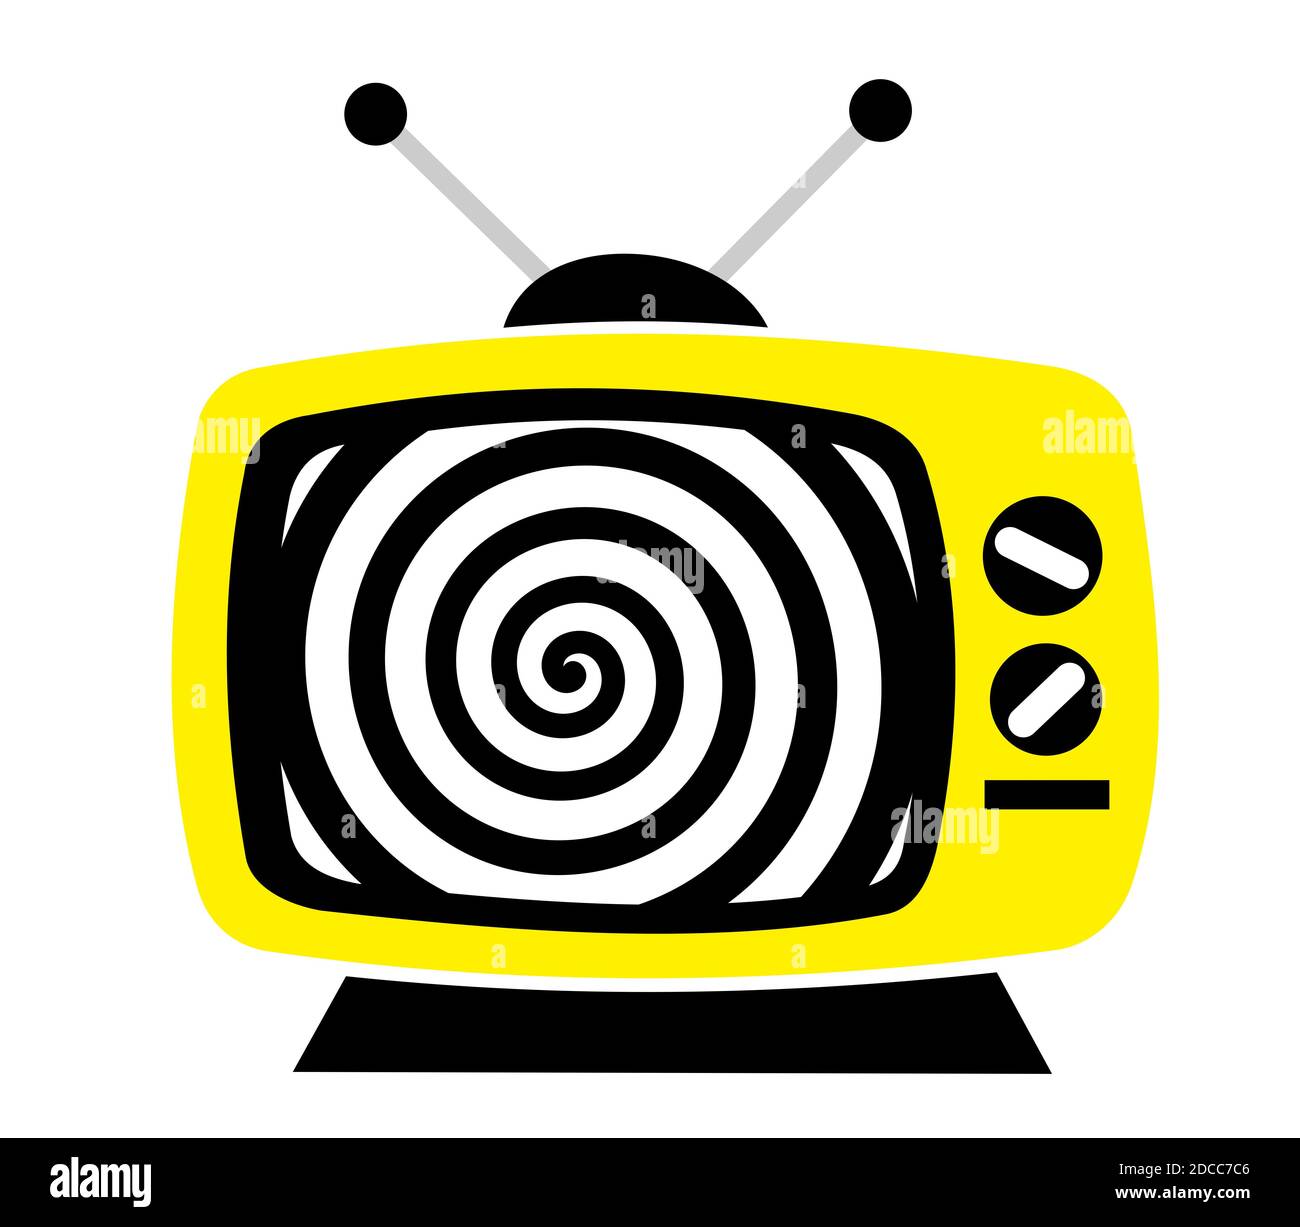 TV, television as influential mass media - hypnotic spiral on the screen. Metaphor of brainwashing and manipulation caused by watching TV and its main Stock Photo